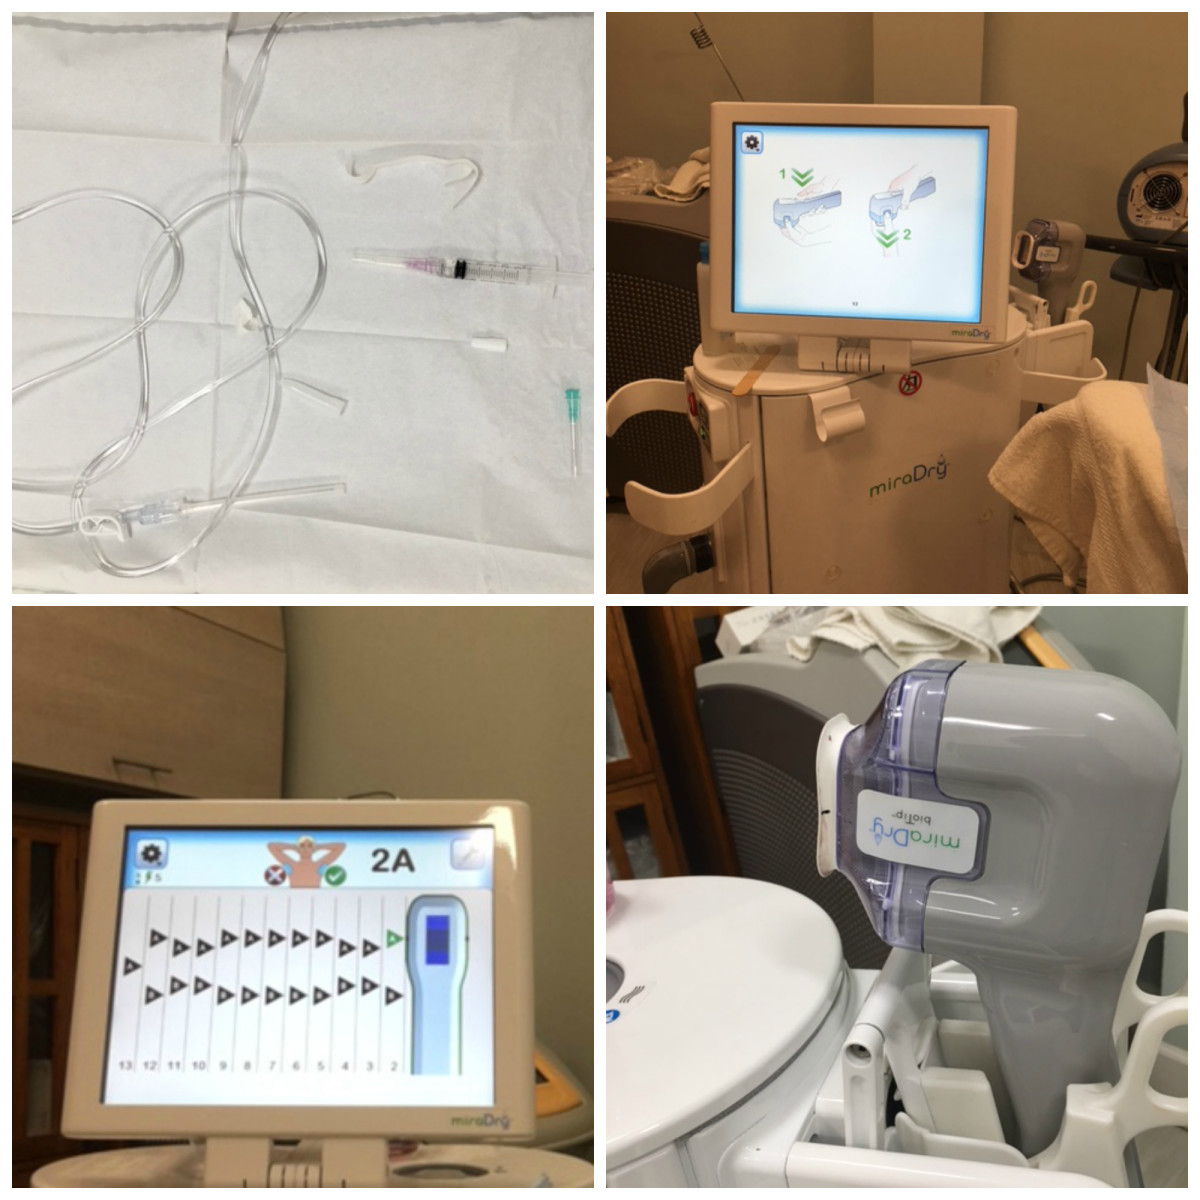 Top left: Elements of anesthesia Top right: Default screen of miraDry® Bottom left: miraDry® screen in action Bottom right: miraDry® "wand"